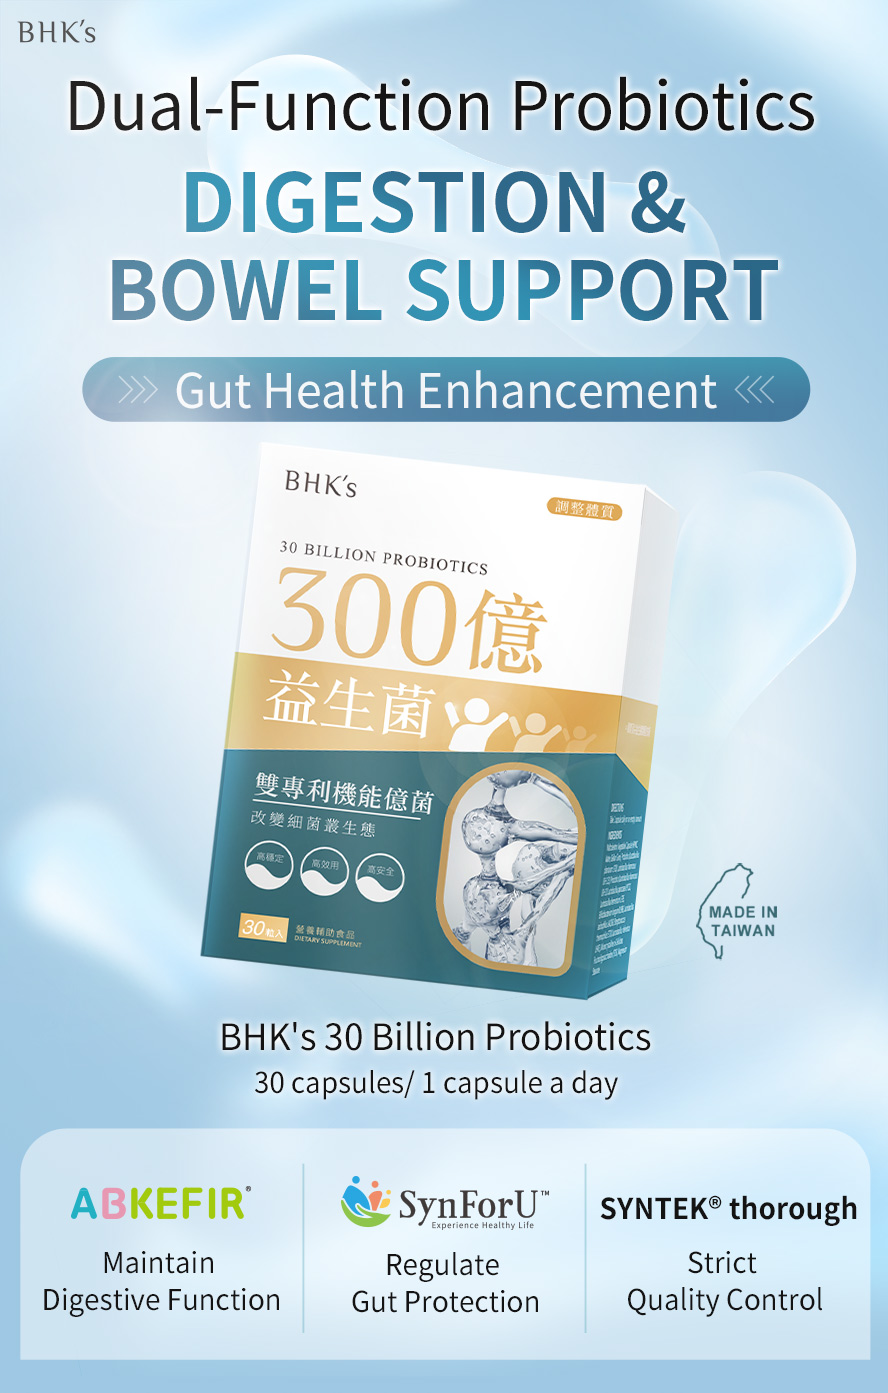 BHK's 300 Billion Probiotic is specialized with patented probiotics for digestive function enhancement